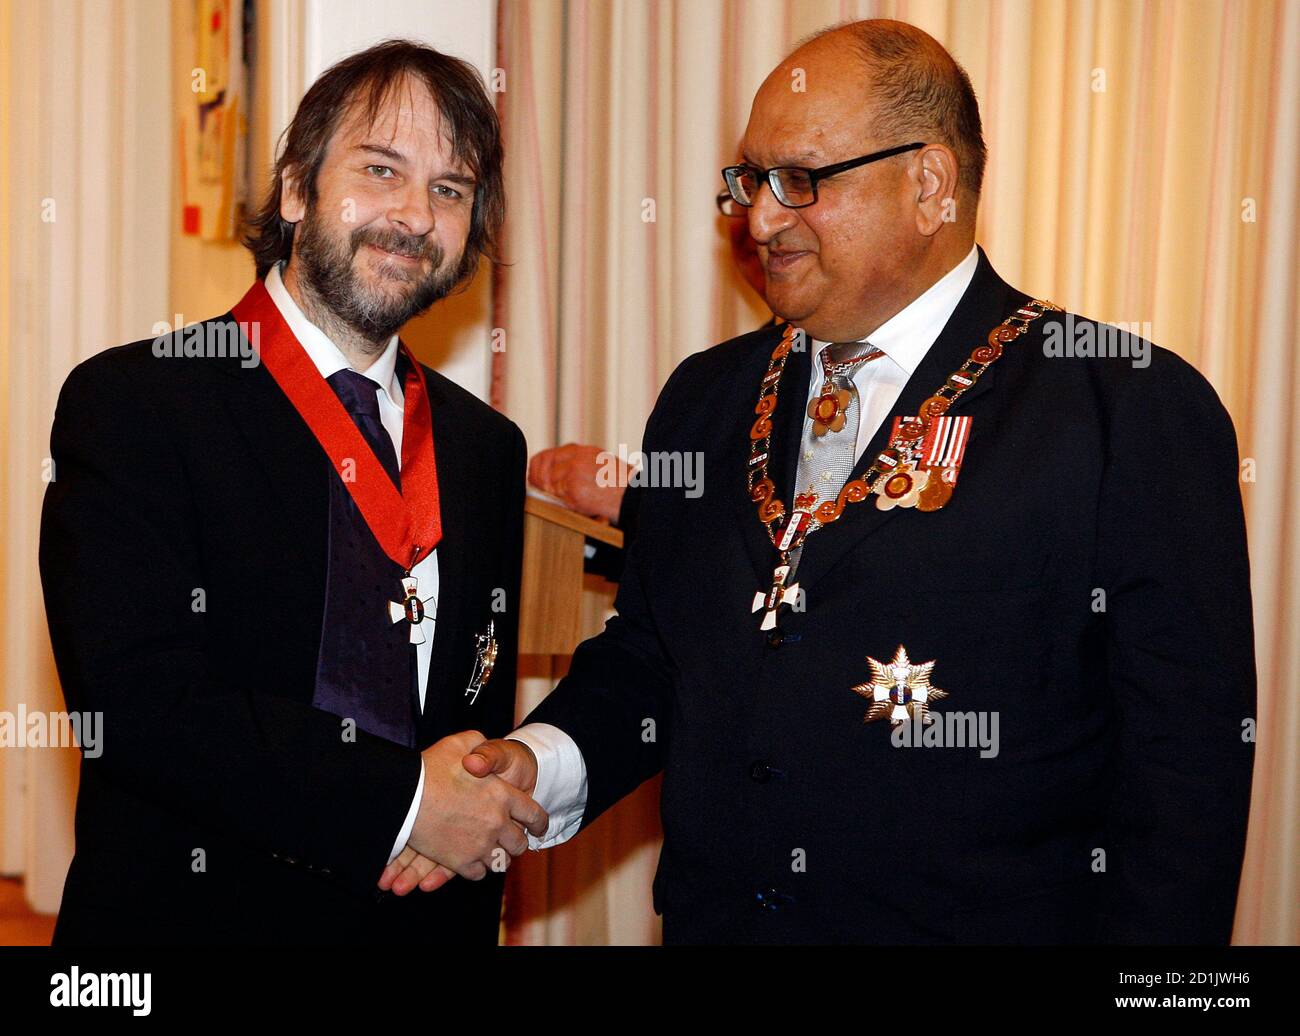 Director Peter Jackson (L) of New Zealand shakes hands with New Zealand's Governor-General Anand Satyanand after being knighted by Satyanand at Premier House in Wellington April 28, 2010. Jackson who directed the 'Lord Of The Rings' trilogy, received the Knight Companion of the New Zealand Order of Merit, for services to the arts. REUTERS/Dominion Post/ Kent Blechynden/Pool (NEW ZEALAND - Tags: ENTERTAINMENT POLITICS) Stock Photo